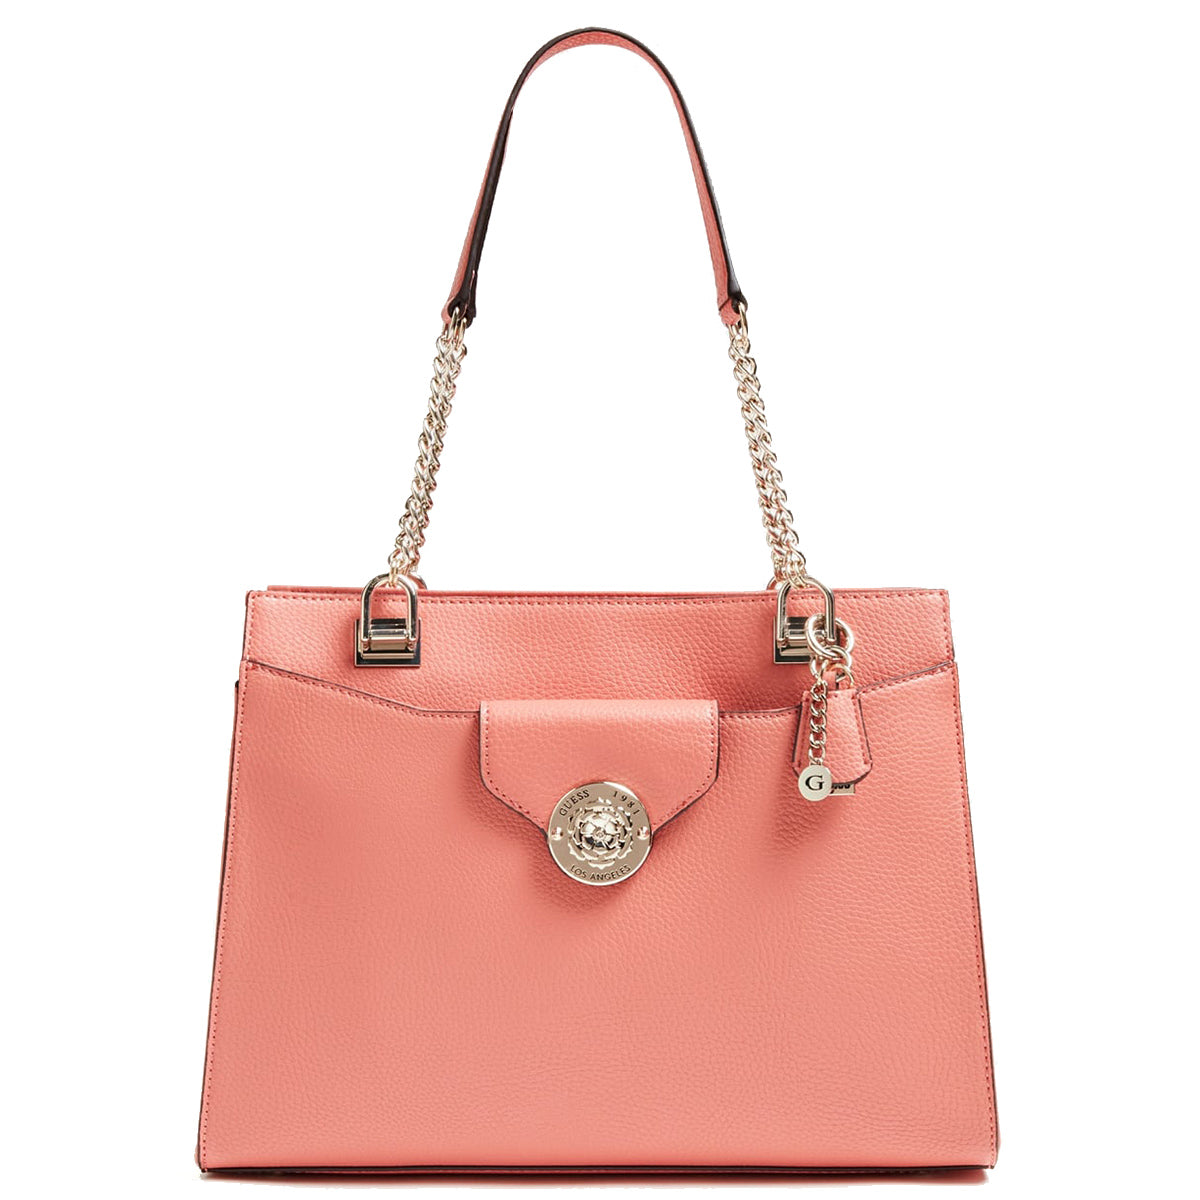 Guess - Shopper Belle Isle Charm Coral - HWVG7744230 - CORAL